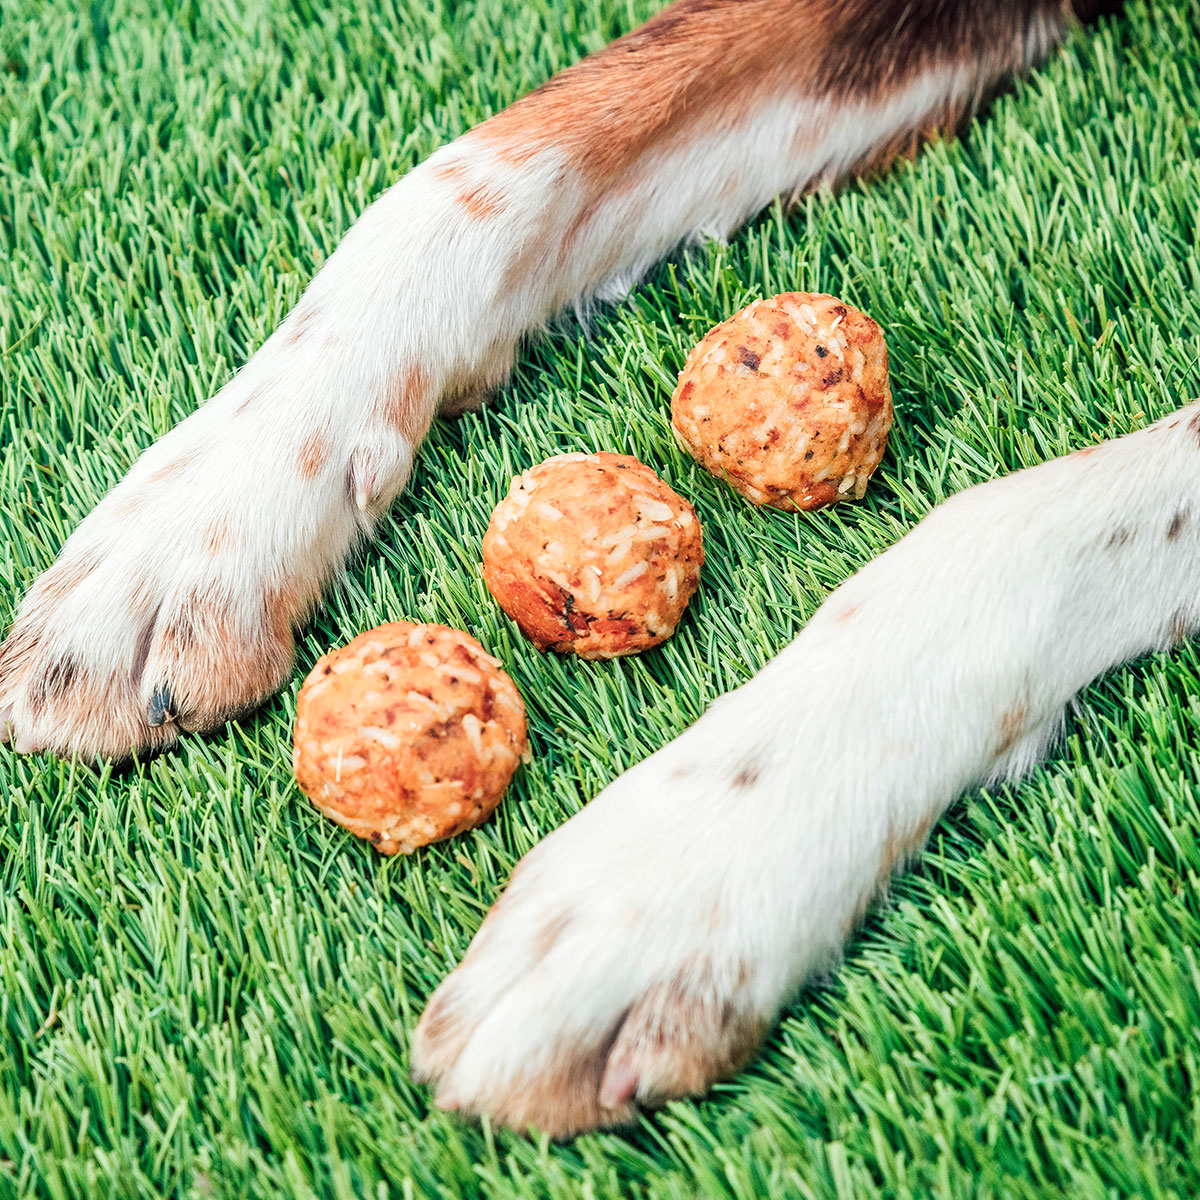 Round salmon and rice dog treats between a dog's paws on grass.